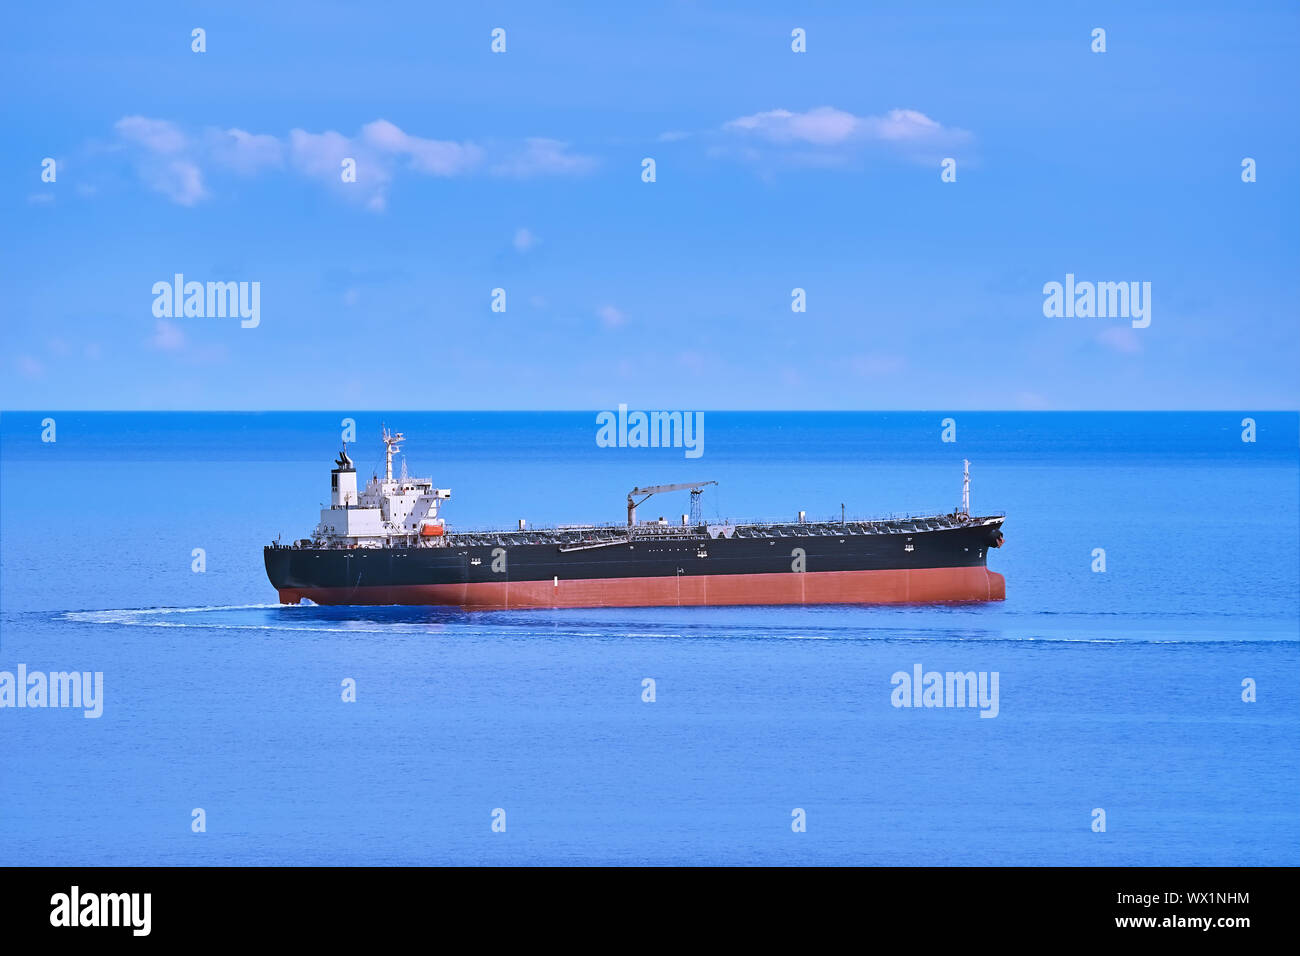 Oil Products Tanker Stock Photo